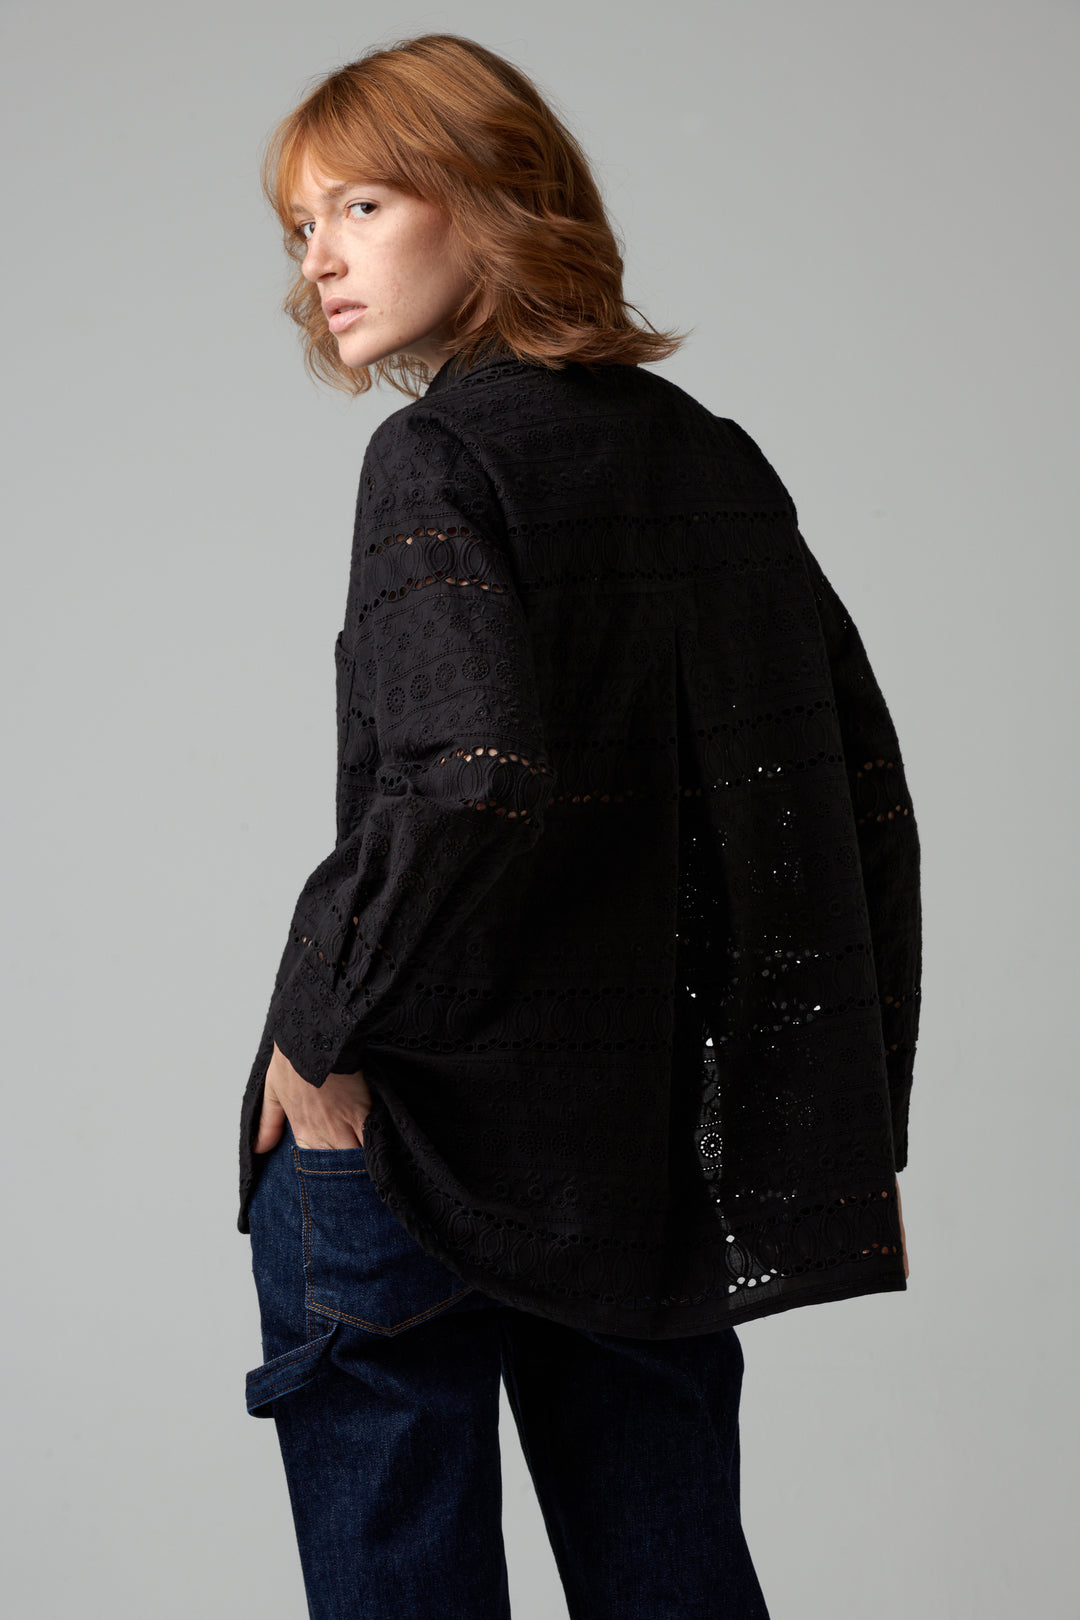 Oliver Lace Shirt